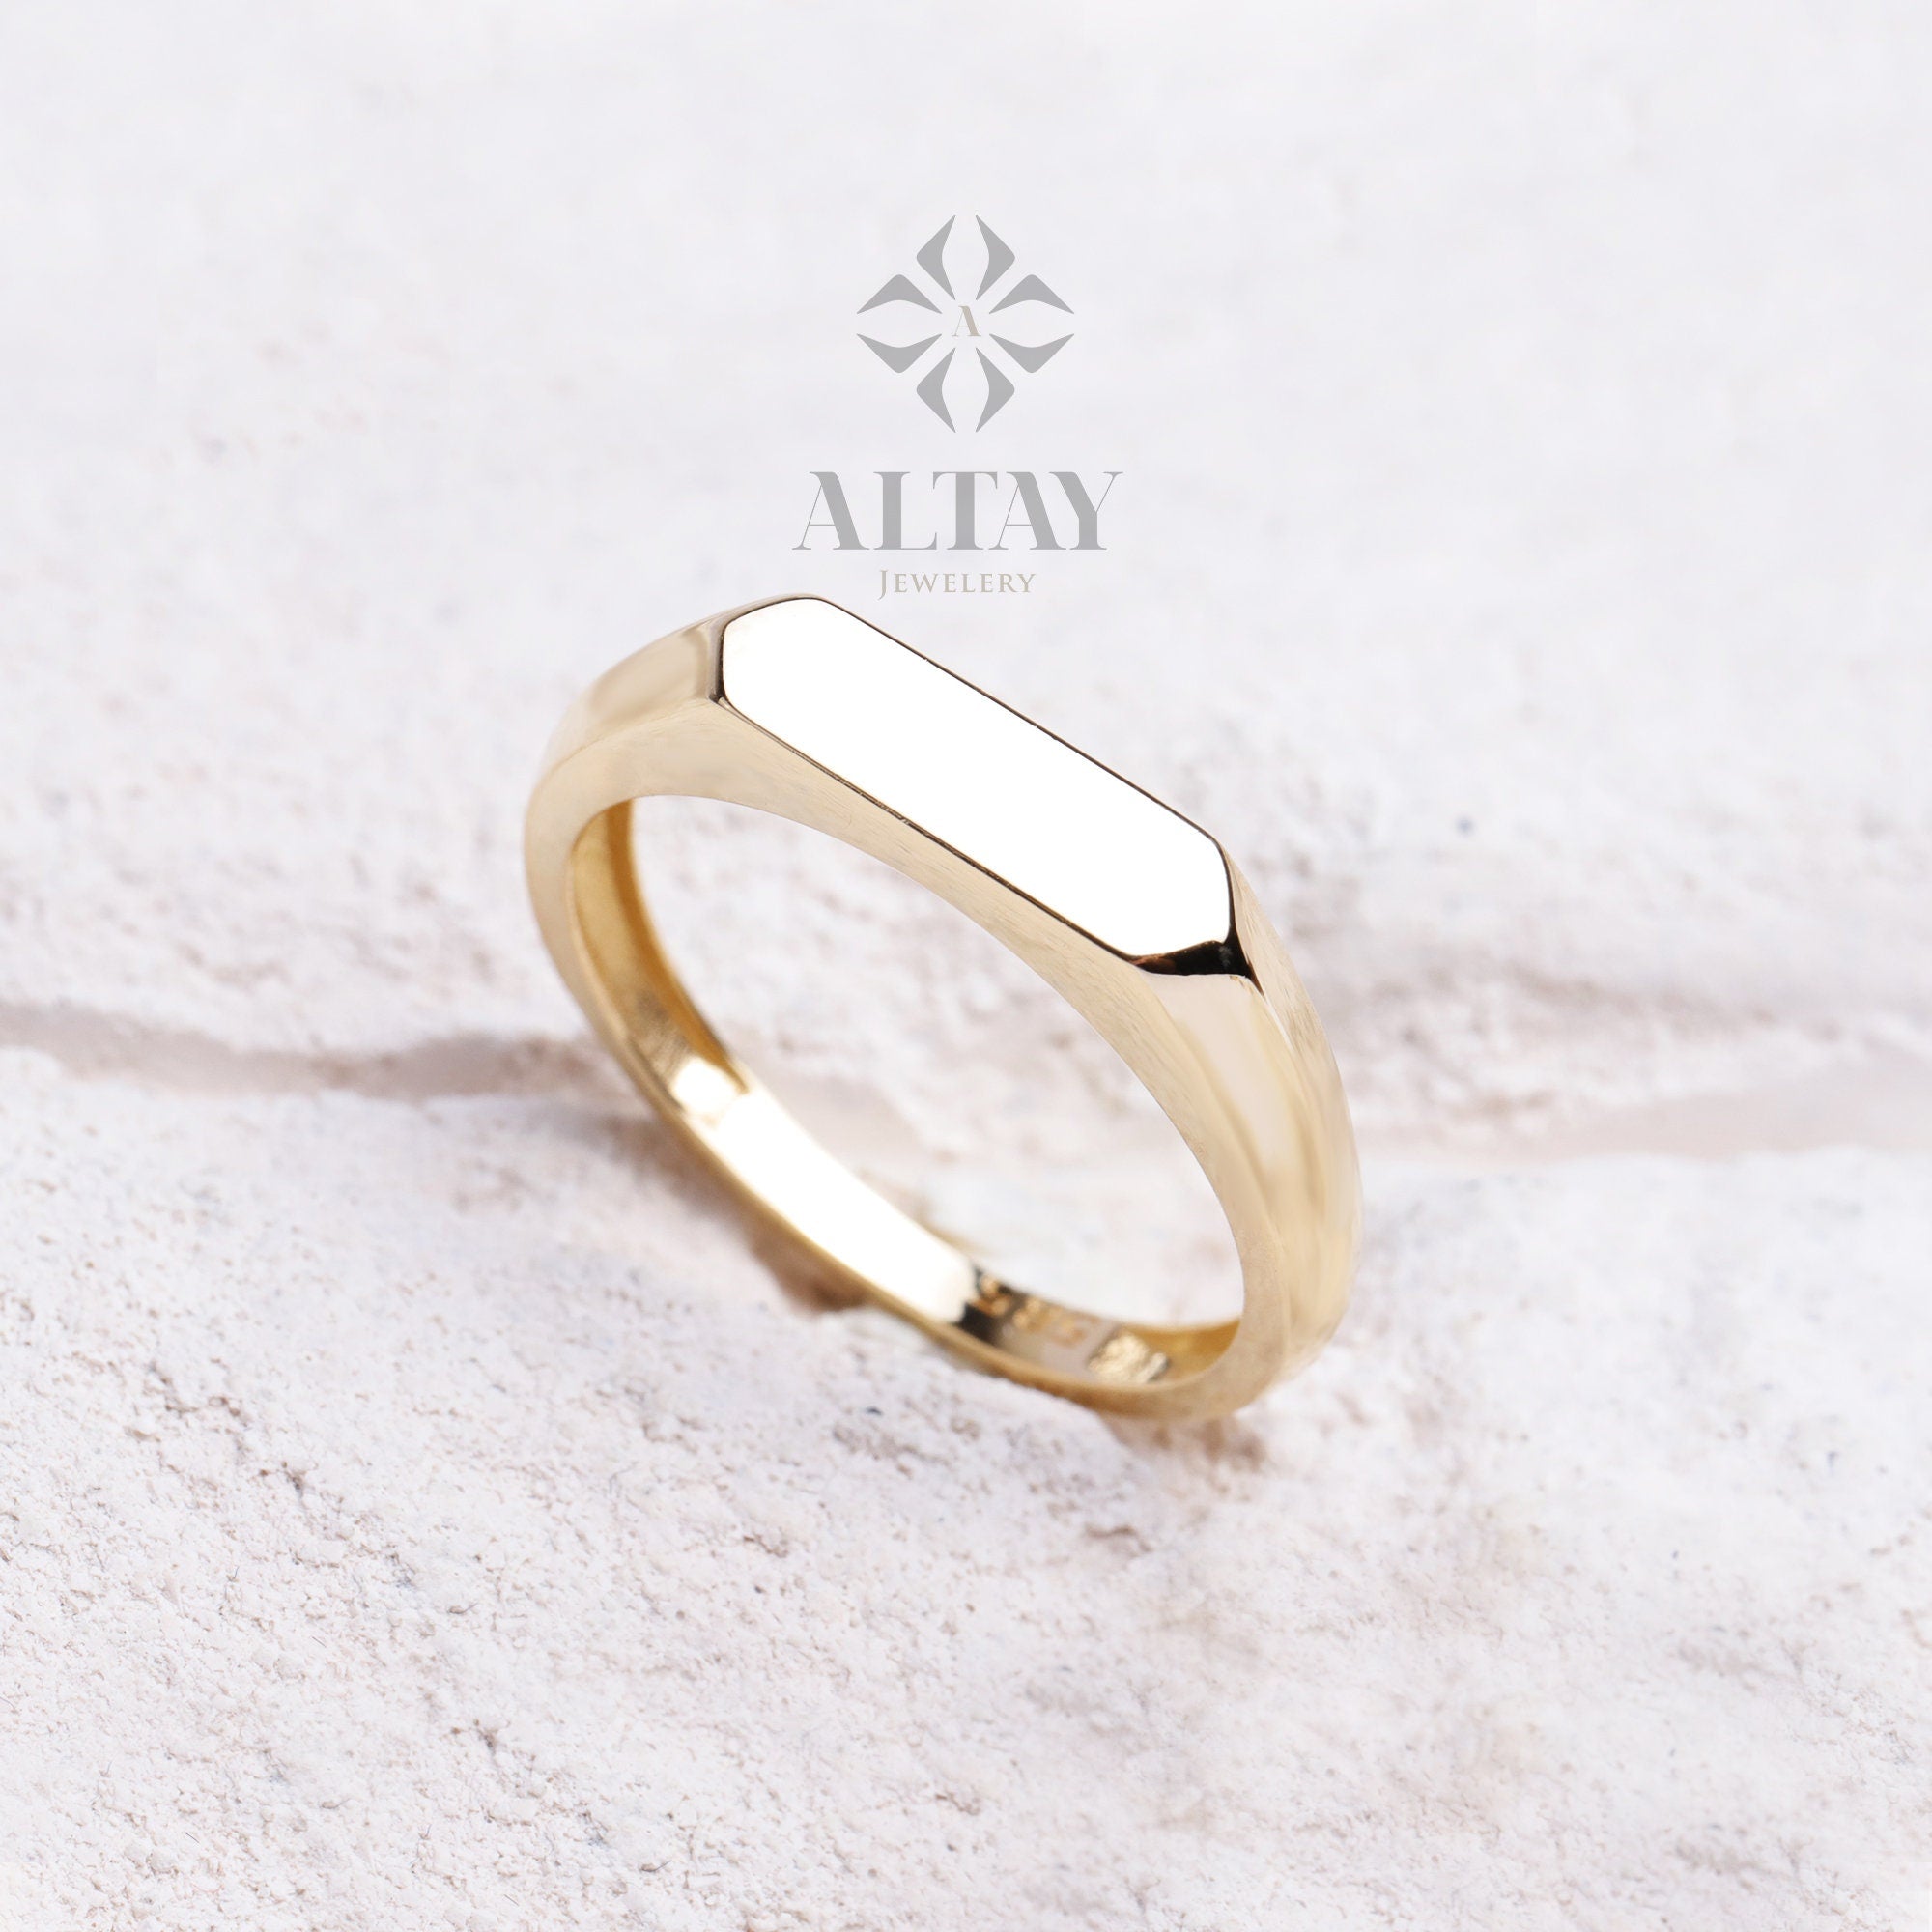 14K Gold Name Ring, Personalized Name Ring, Stacking Name Ring, Initial Gold Ring, Custom Name Ring, Letter Ring, Bridesmaid Gift For Her